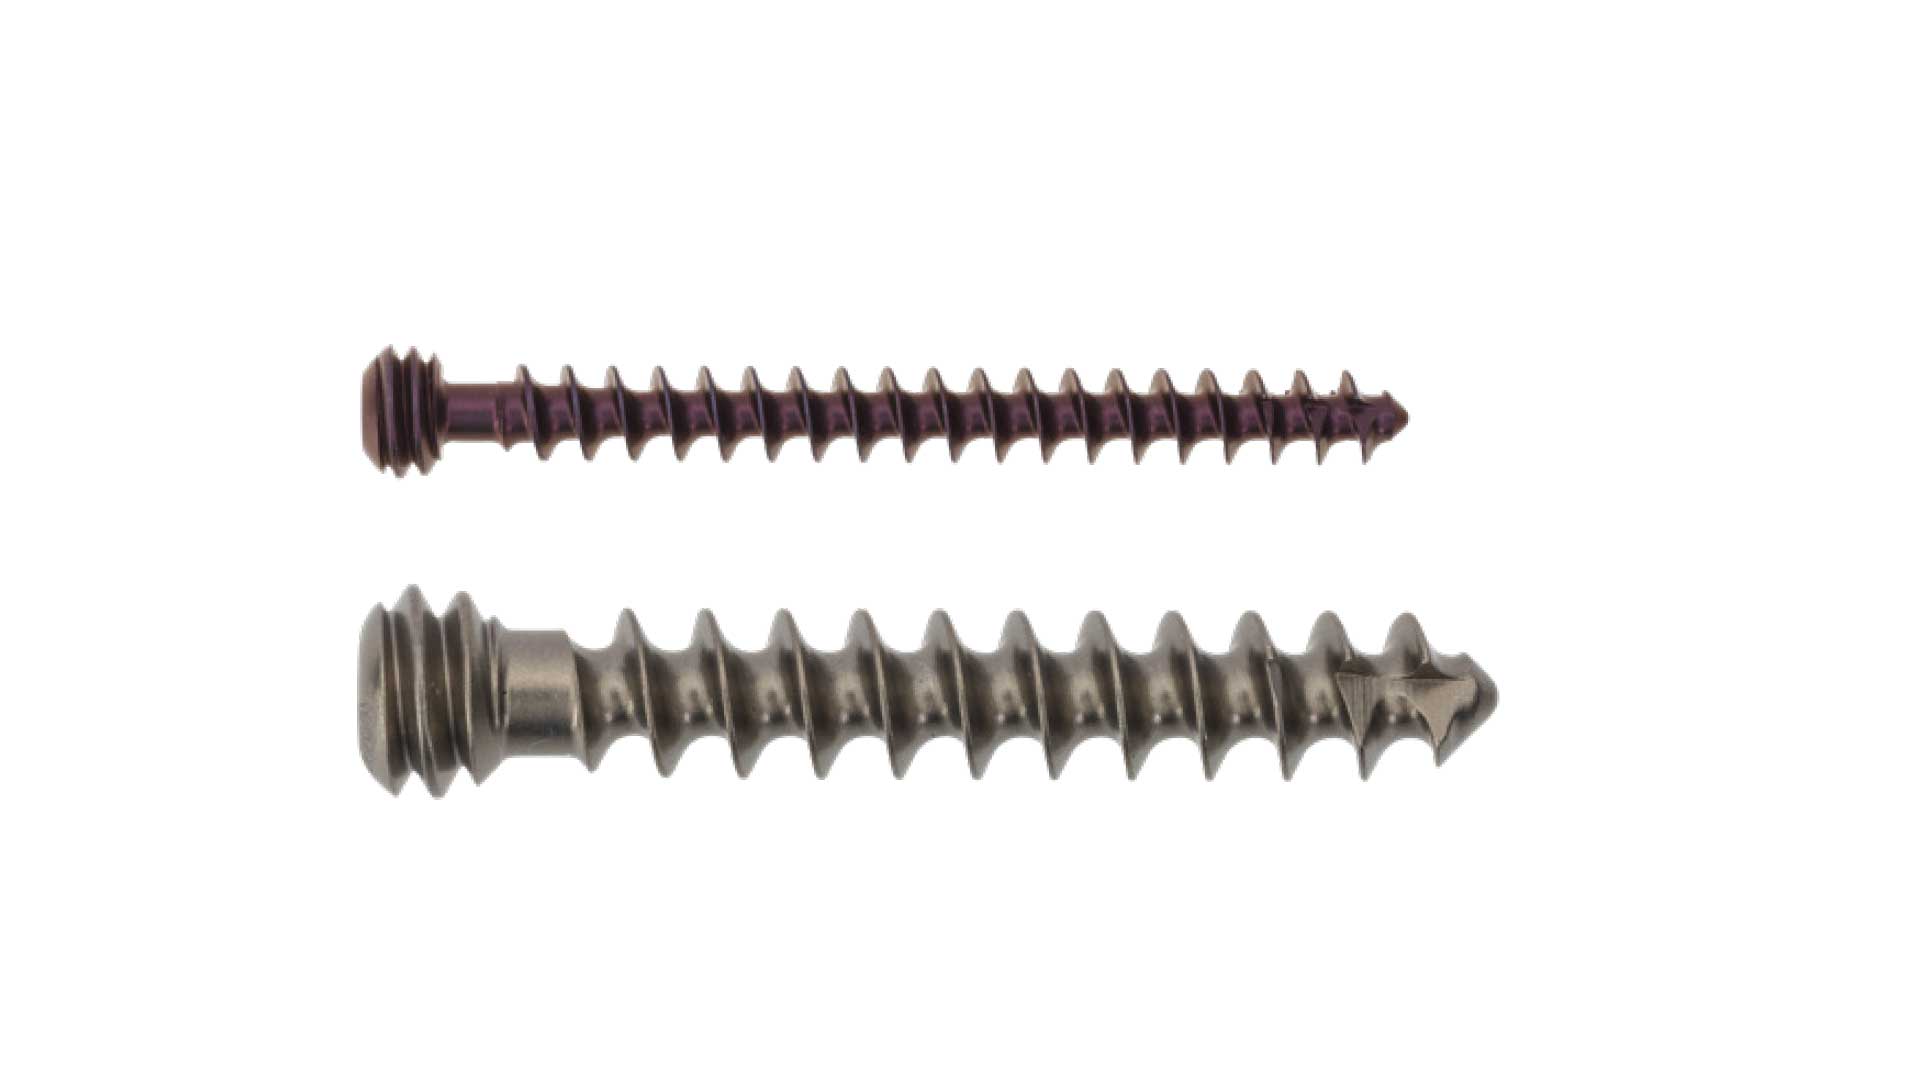 Königsee Implantate Products: Cancellous screws angle-stable; titanium, category Screws